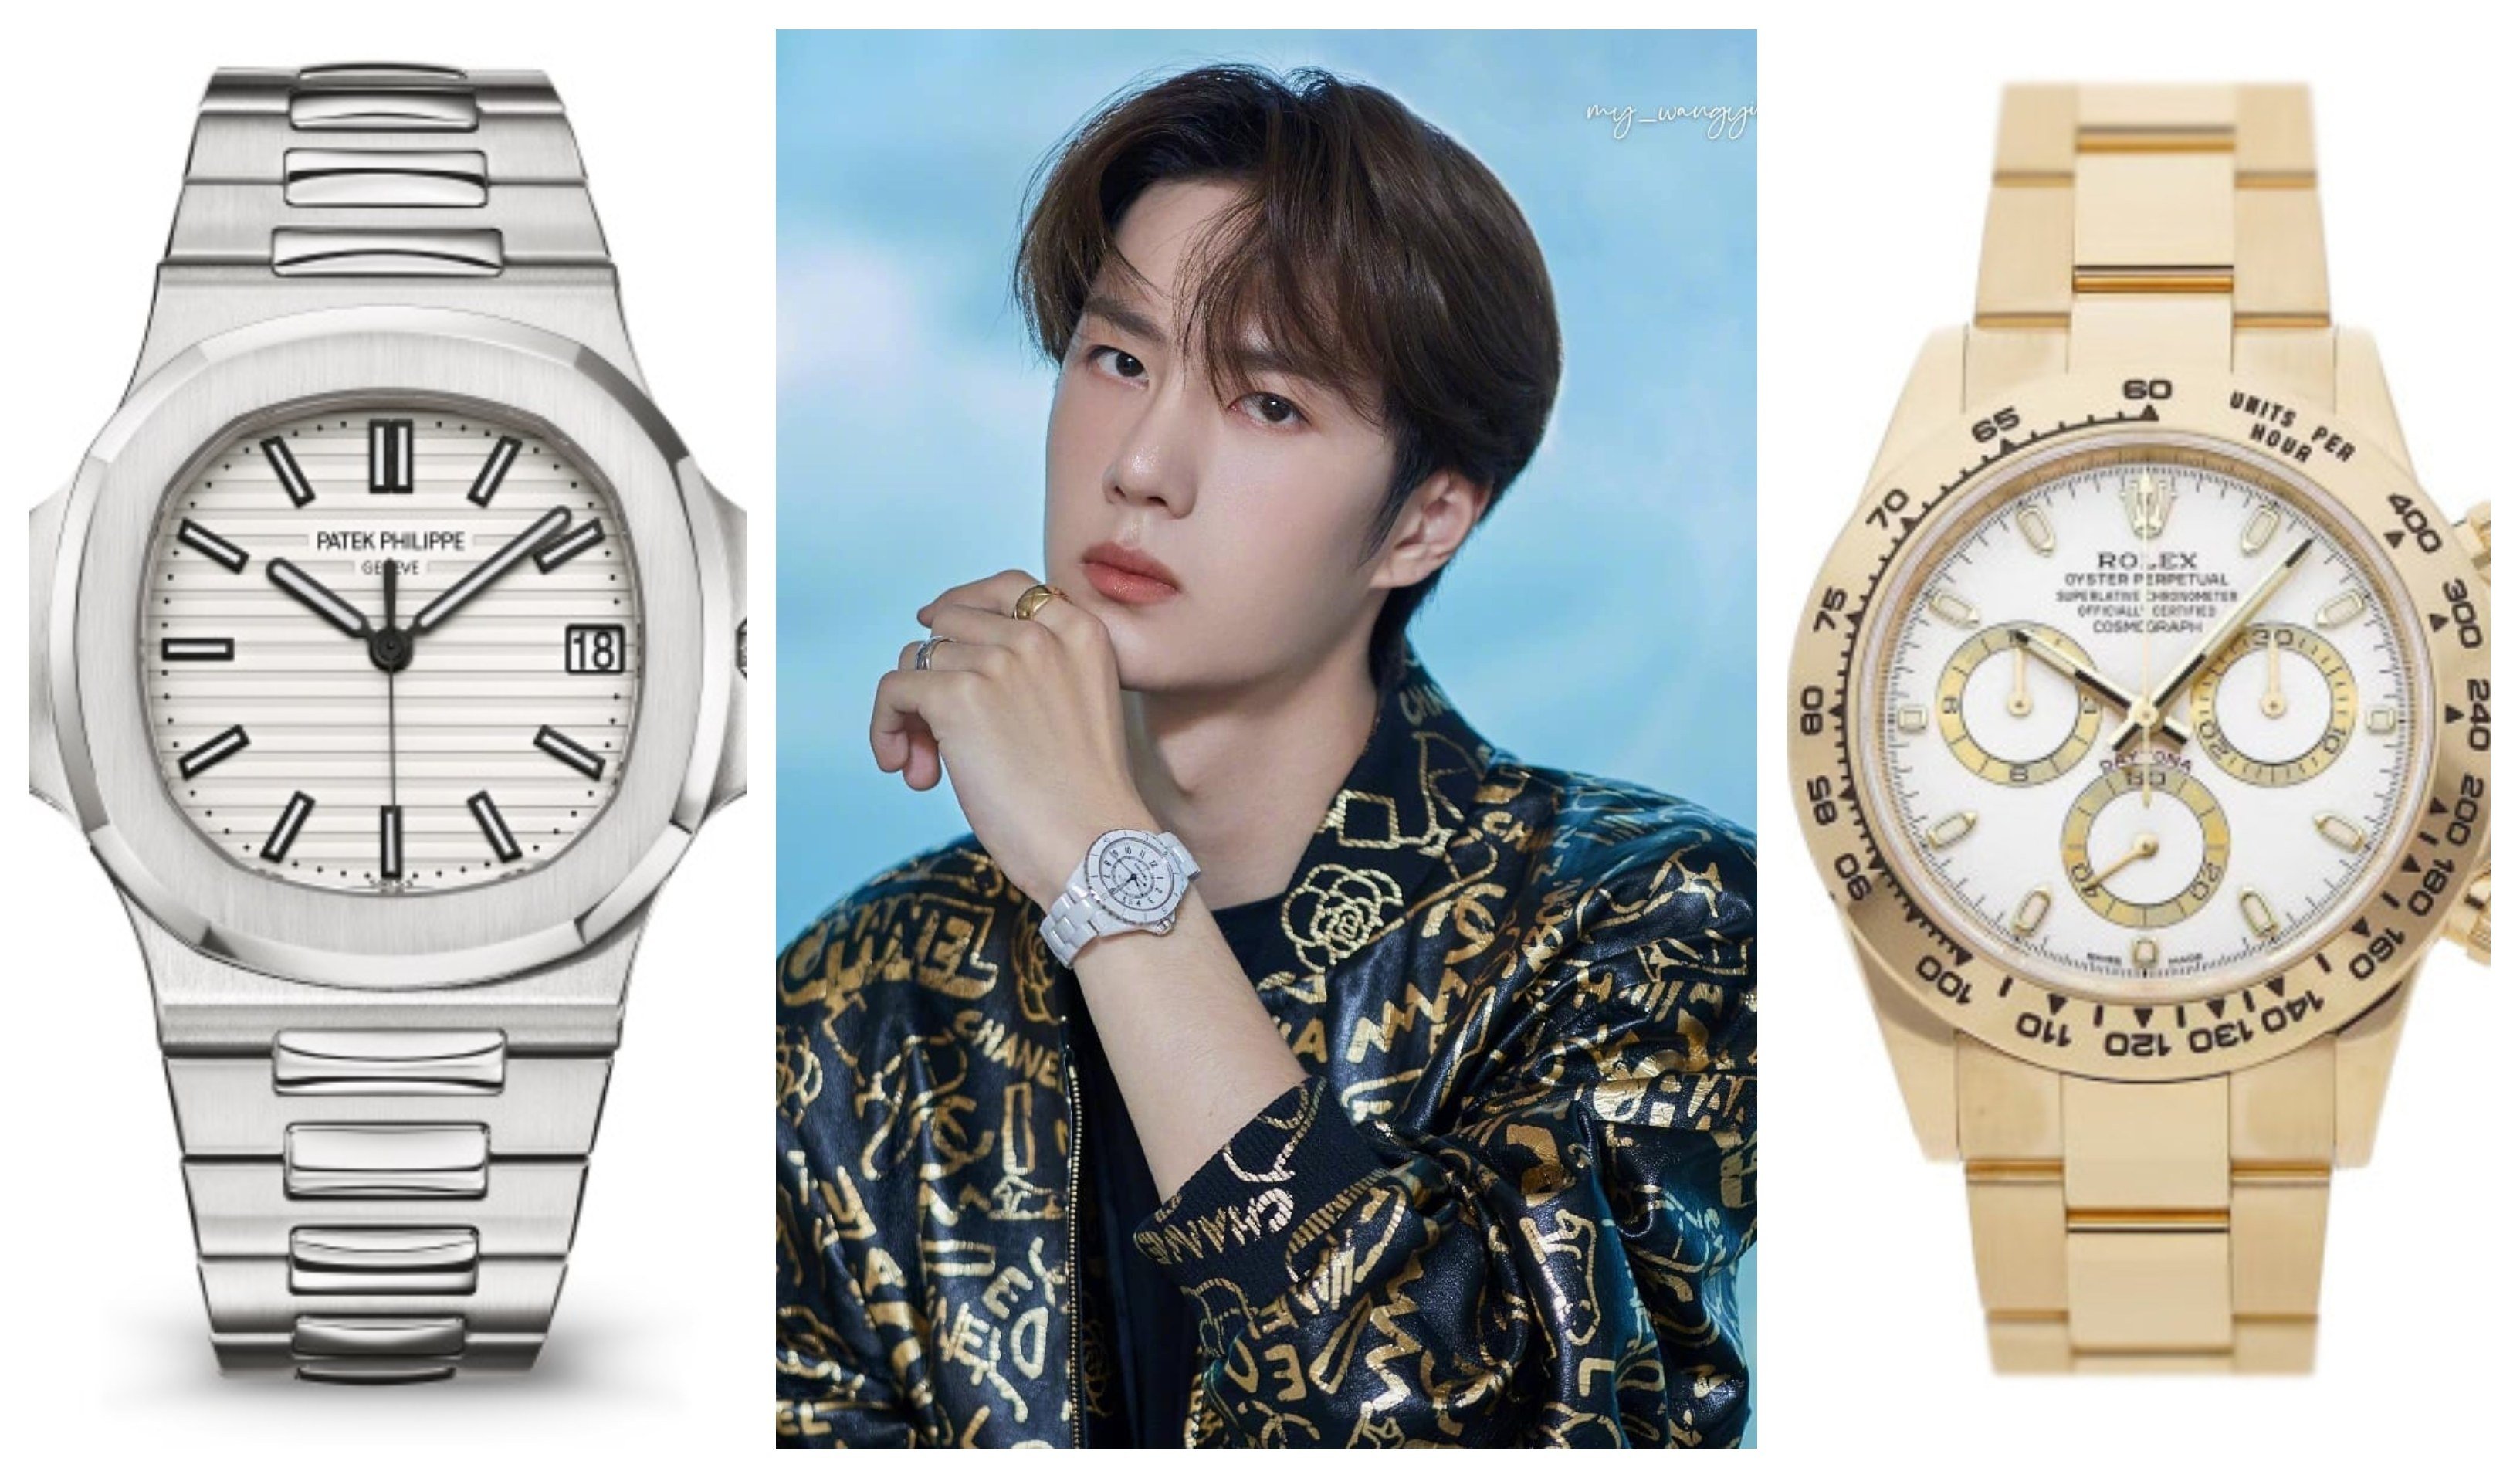 Wang Yibo’s luxury watch collection includes models from Rolex and Patek Philippe. Photos: Vendome Monte Carlo; @w.yibouniq/Instagram; Timepiece Bank